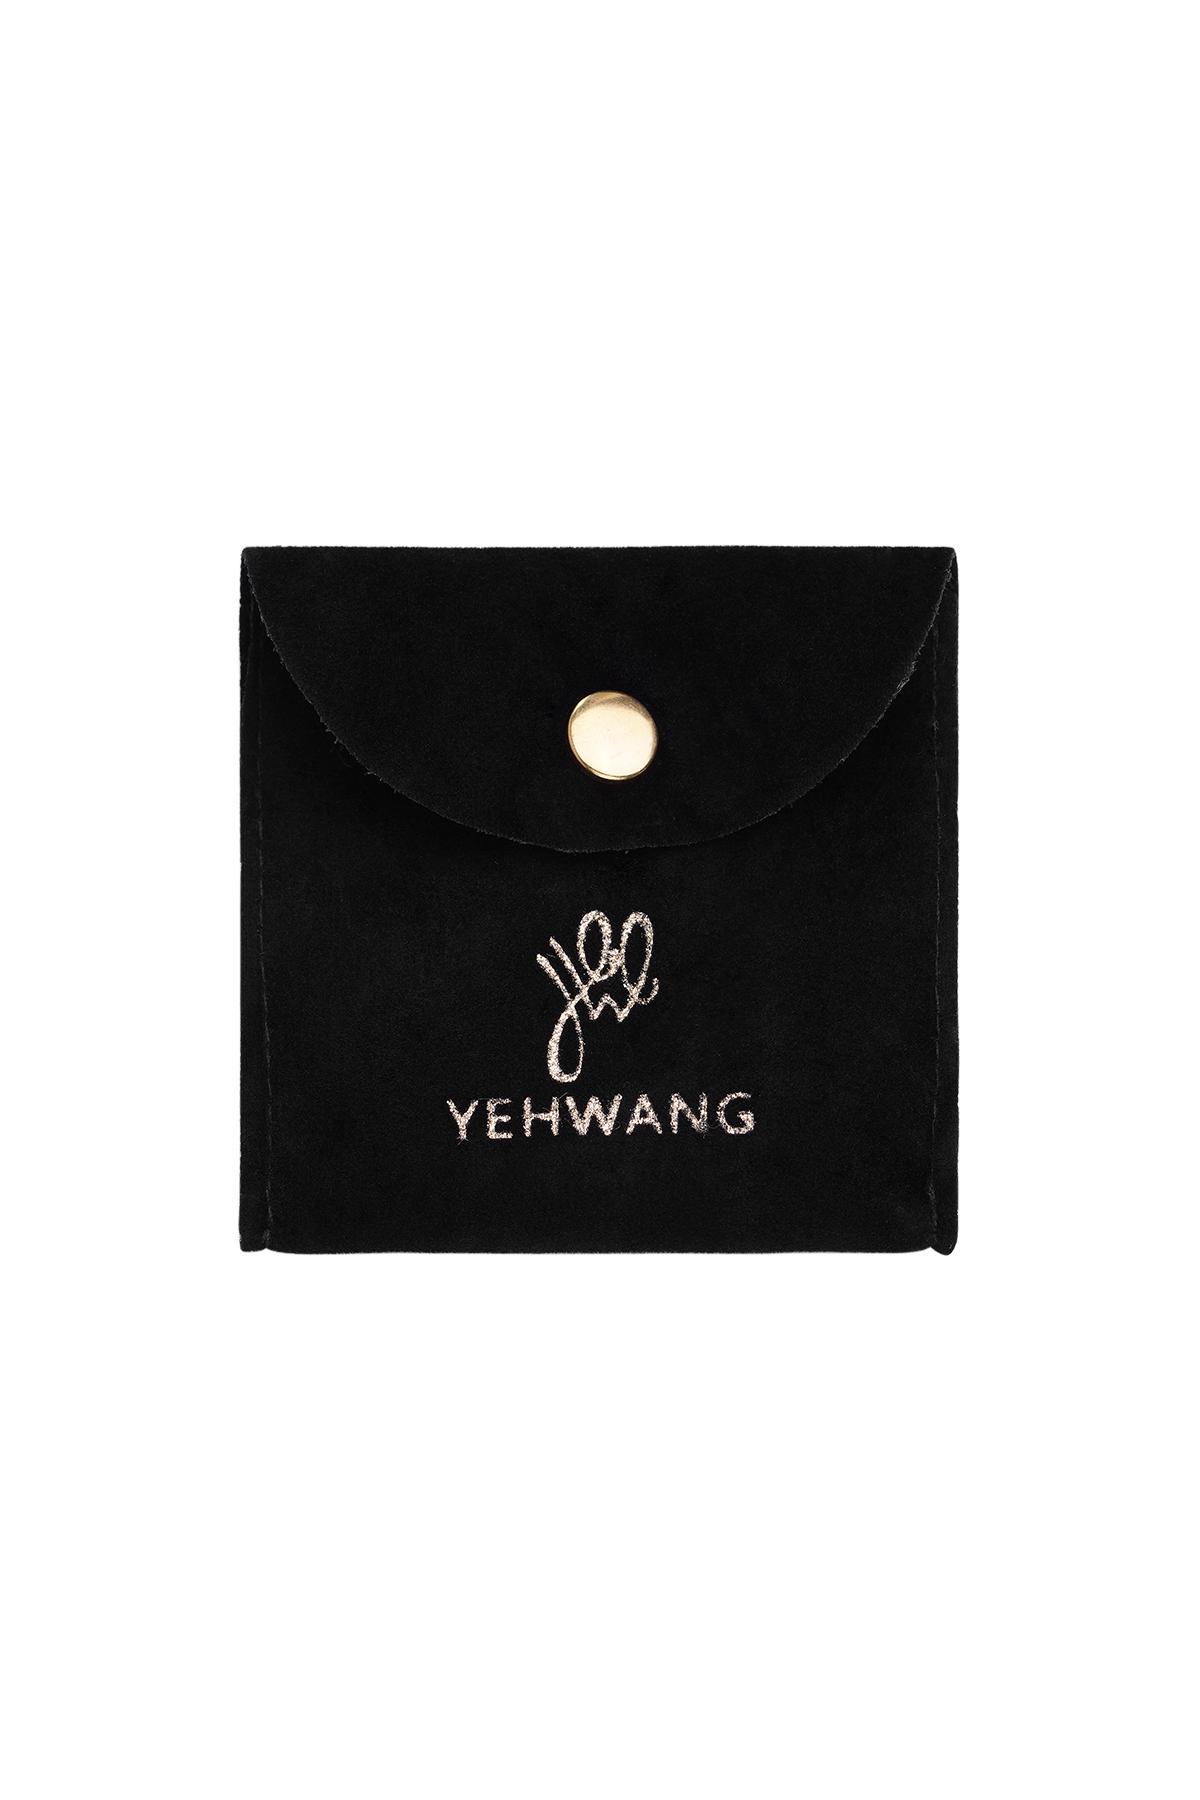 Black / Jewelry pouch Black Polyester 